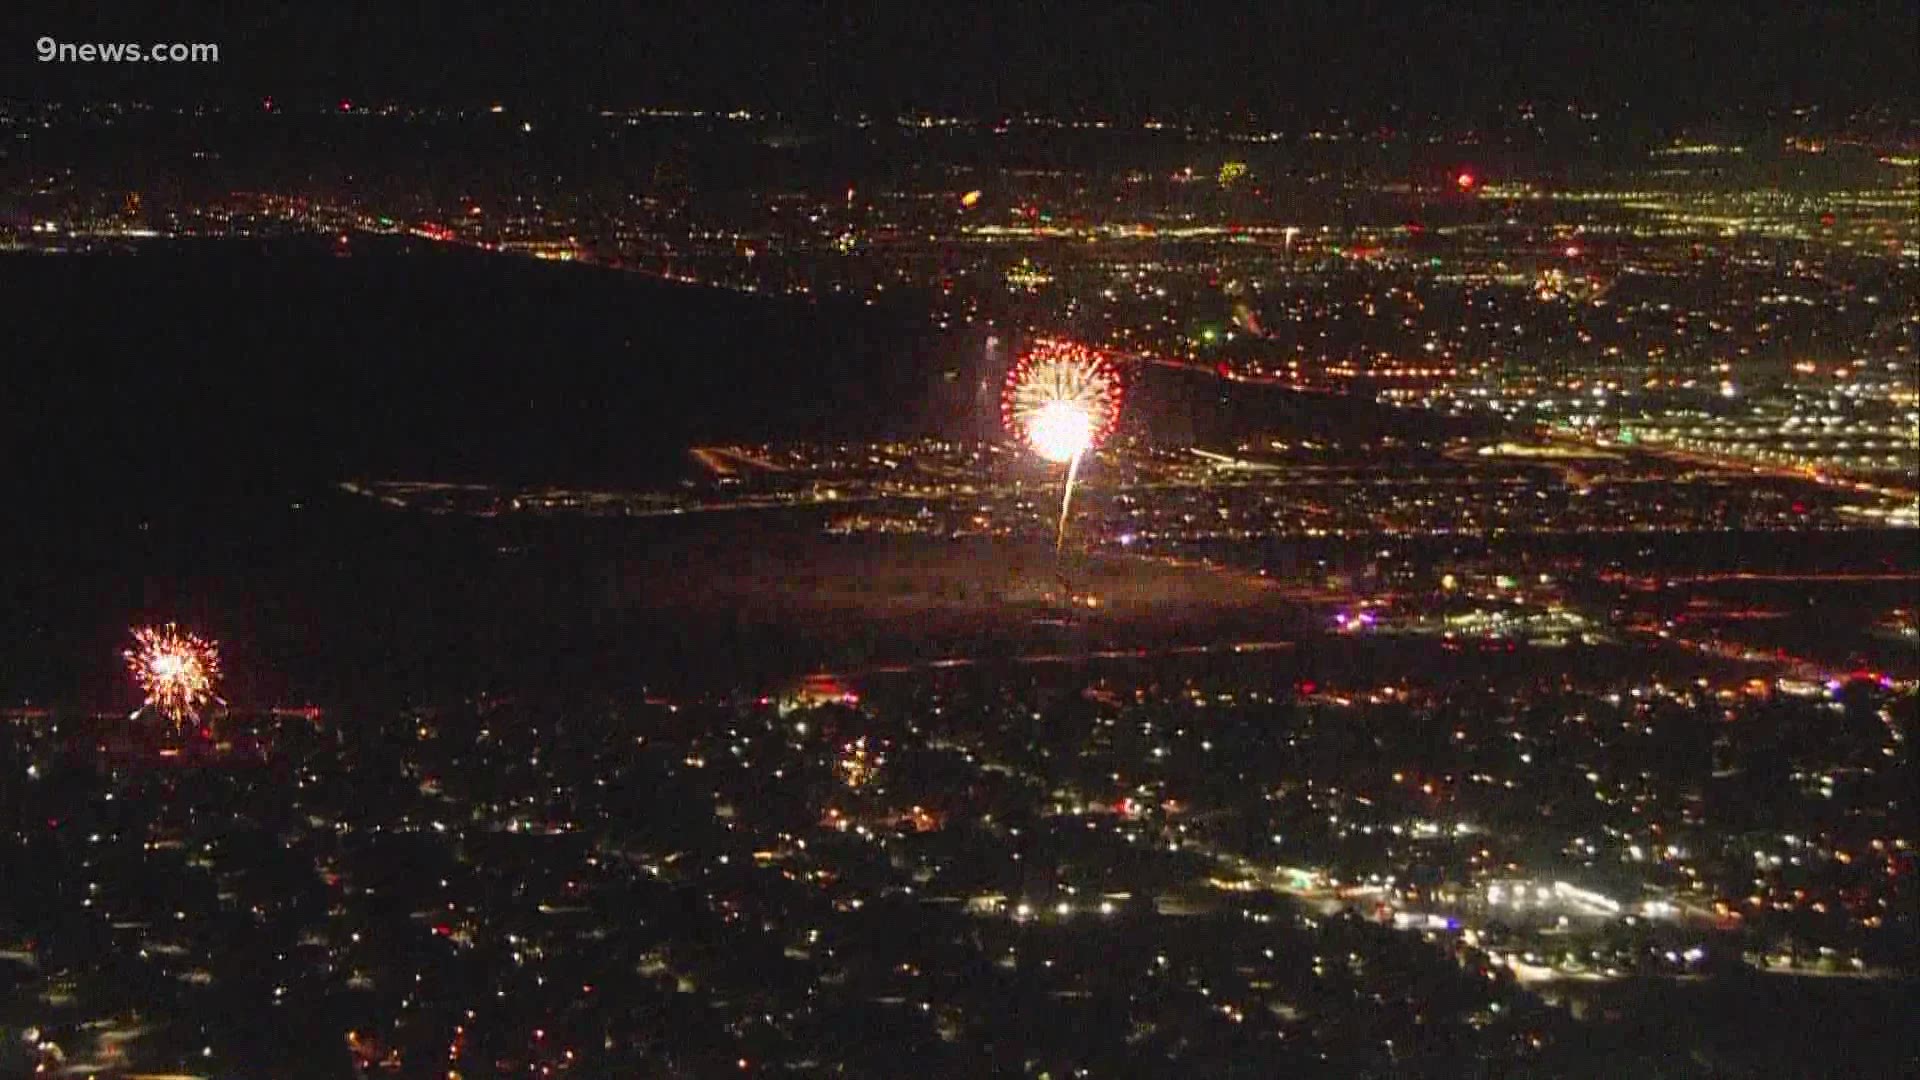 Sky9 captured fireworks across the Denver metro area on Independence Day 2021.